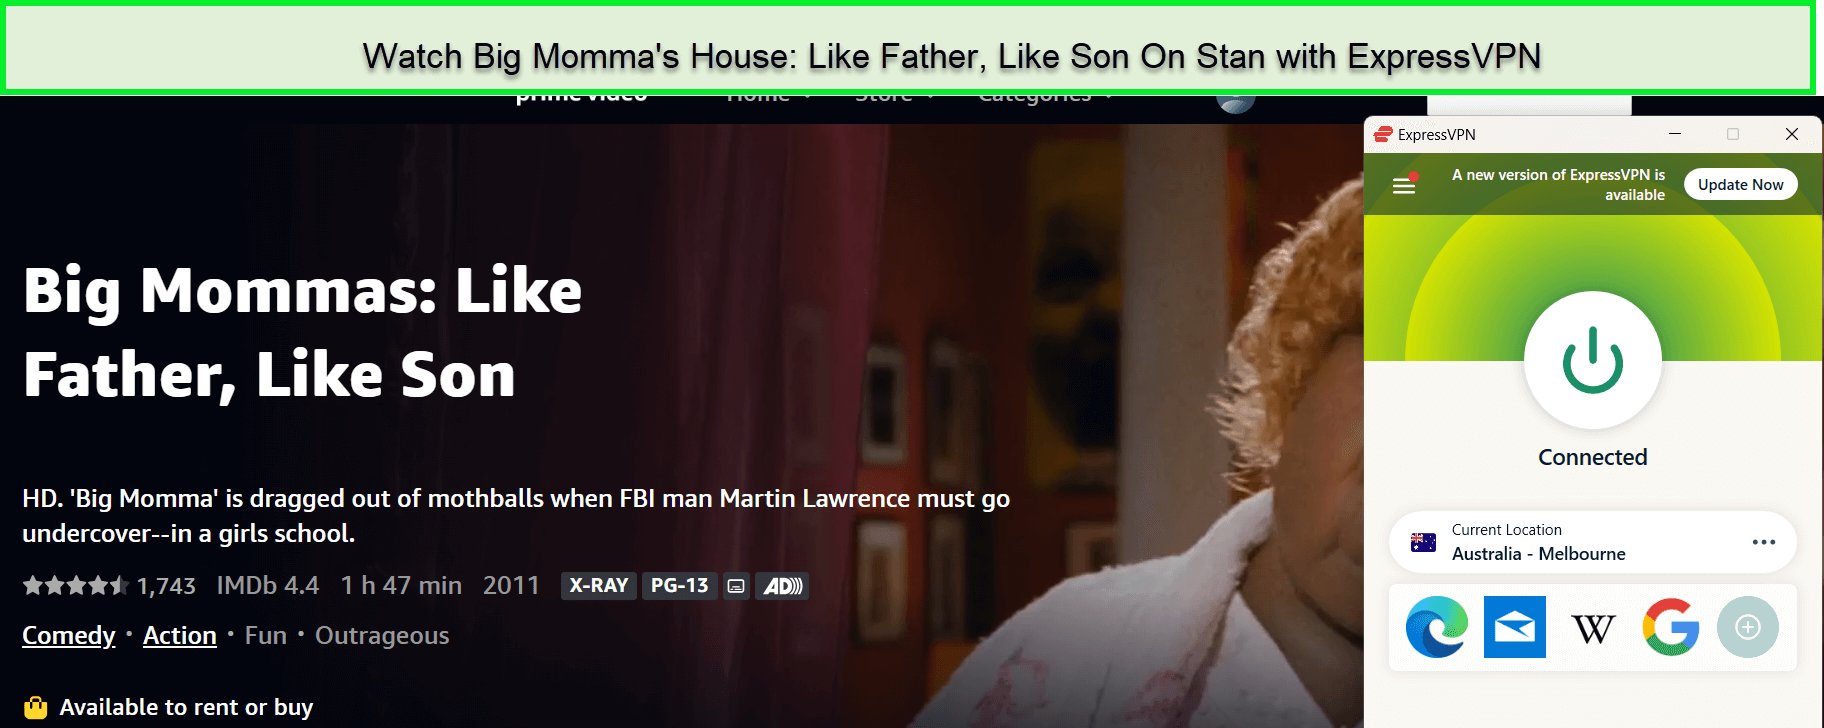 Watch Big Momma's House: Like Father, Like Son in-India On Stan